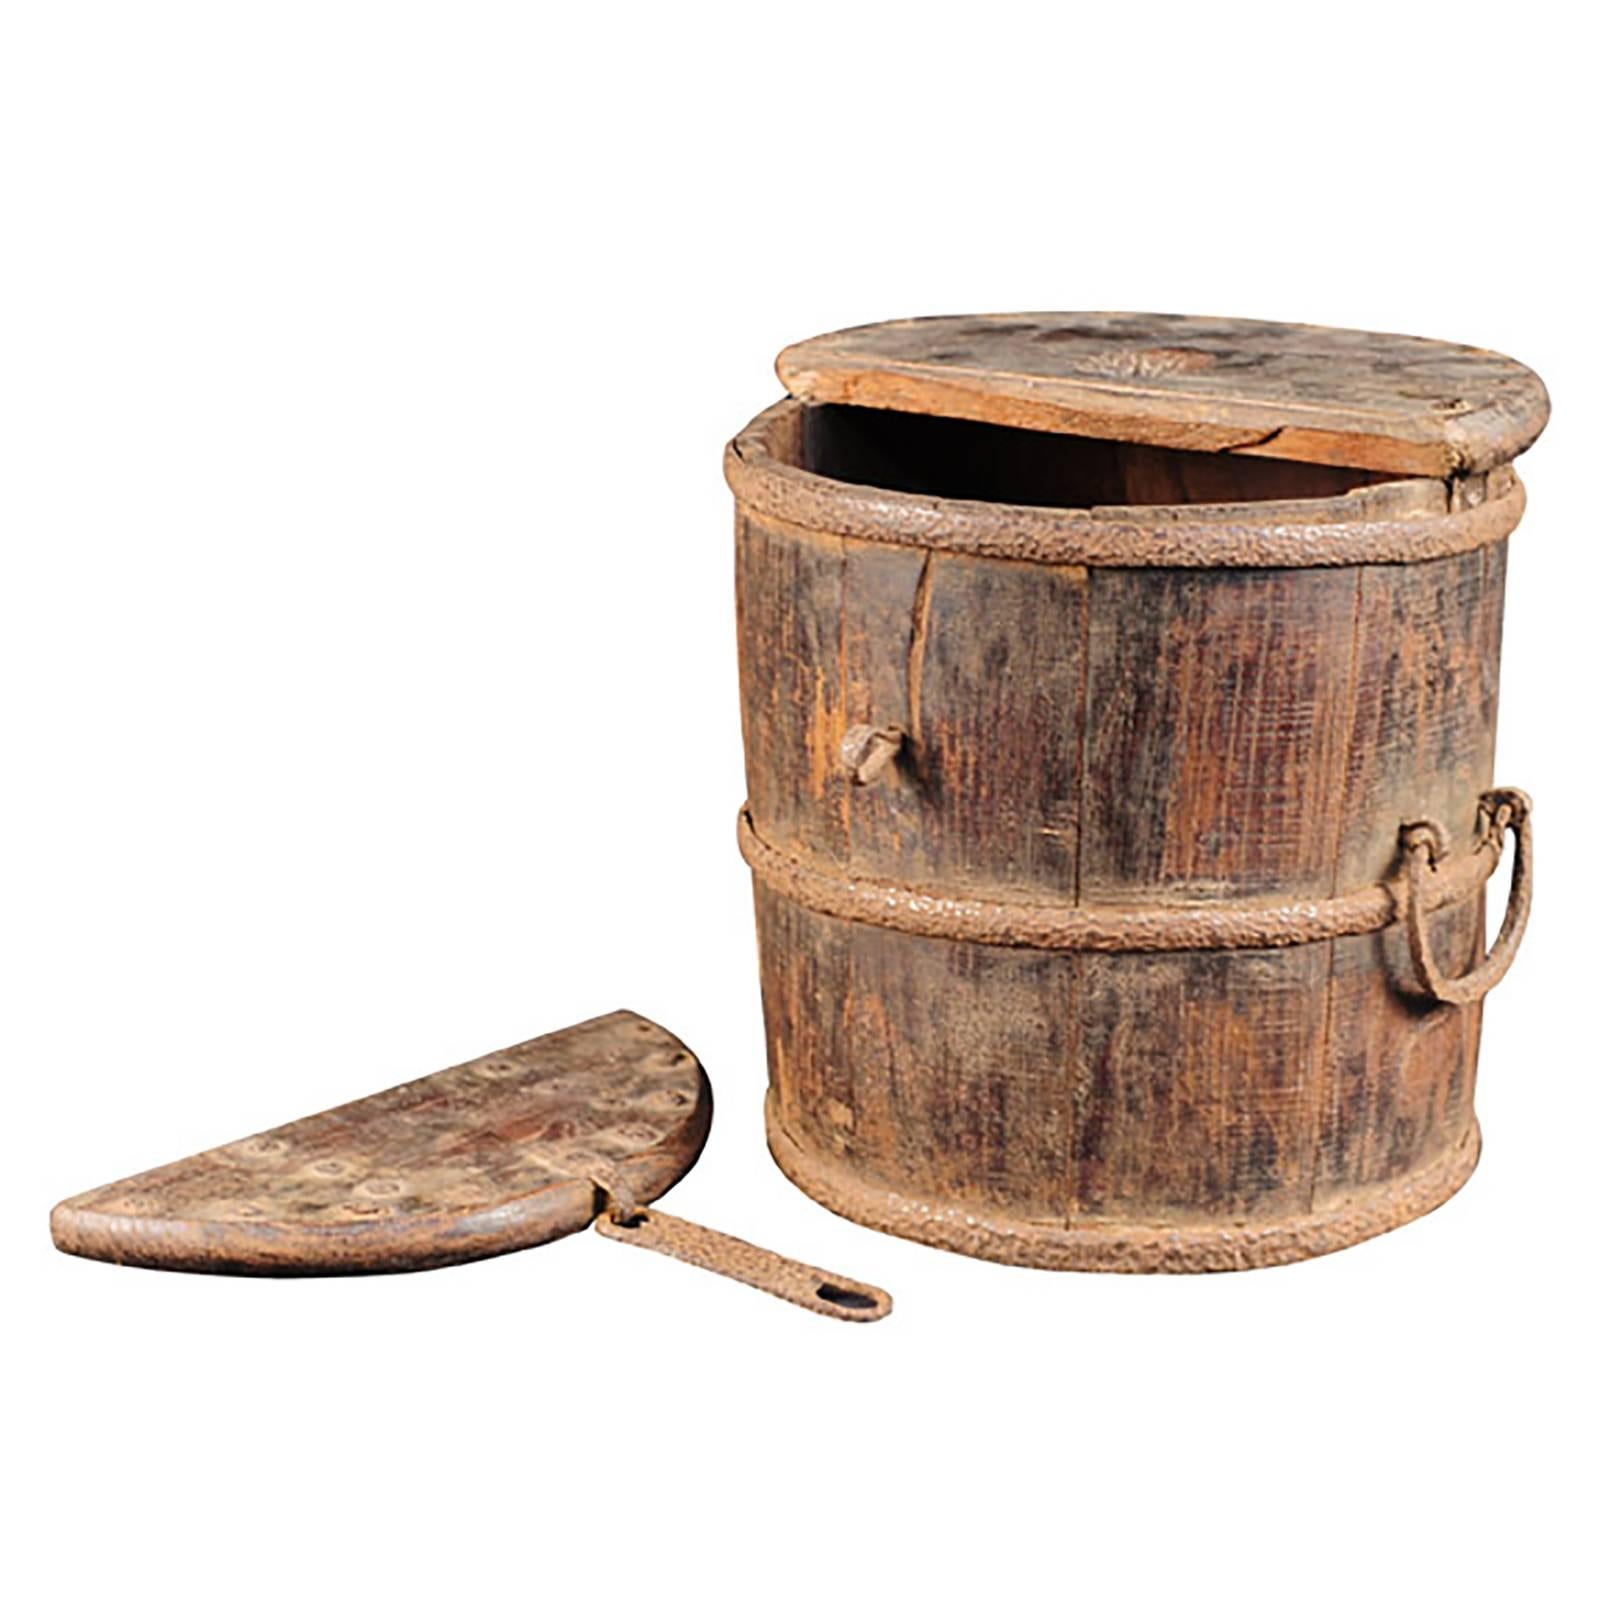 This early 19th century Chinese merchant's coin barrel is made from slats of wood strapped together with hand-wrought iron rings. Its form suggests it was originally intended for other uses, but an enterprising merchant saw its potential and carved